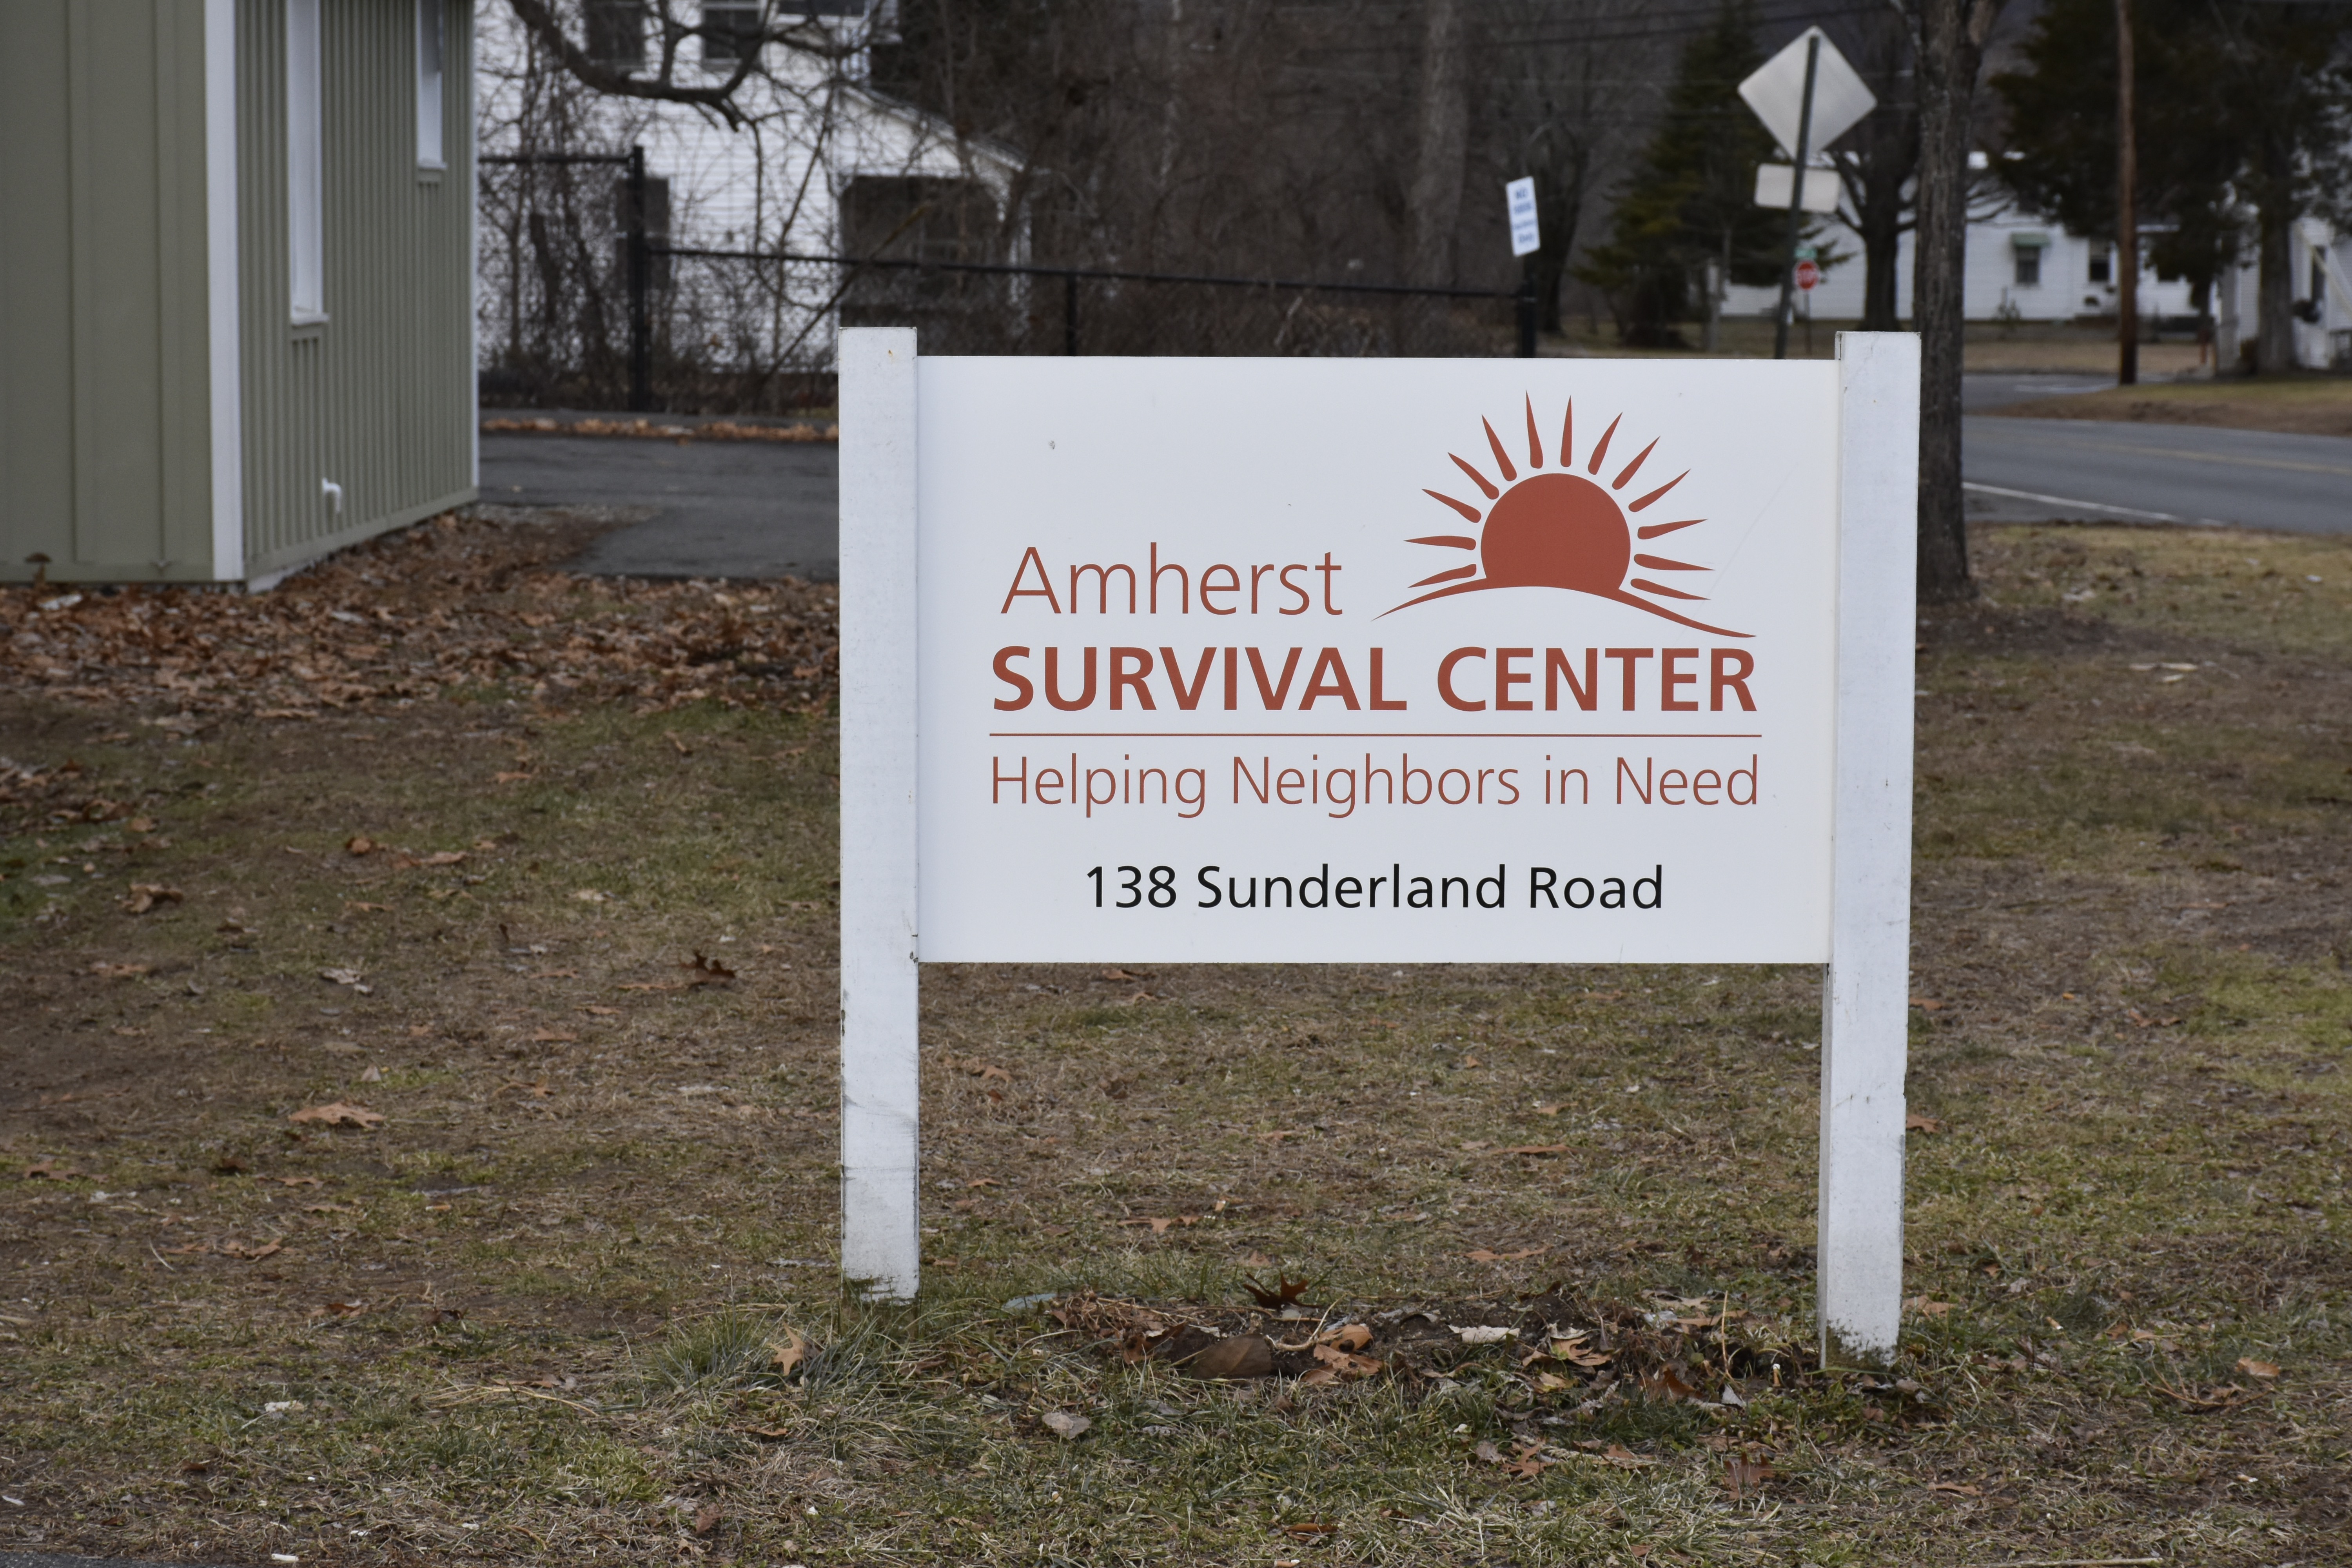 Staff and Board of Directors – Amherst Survival Center